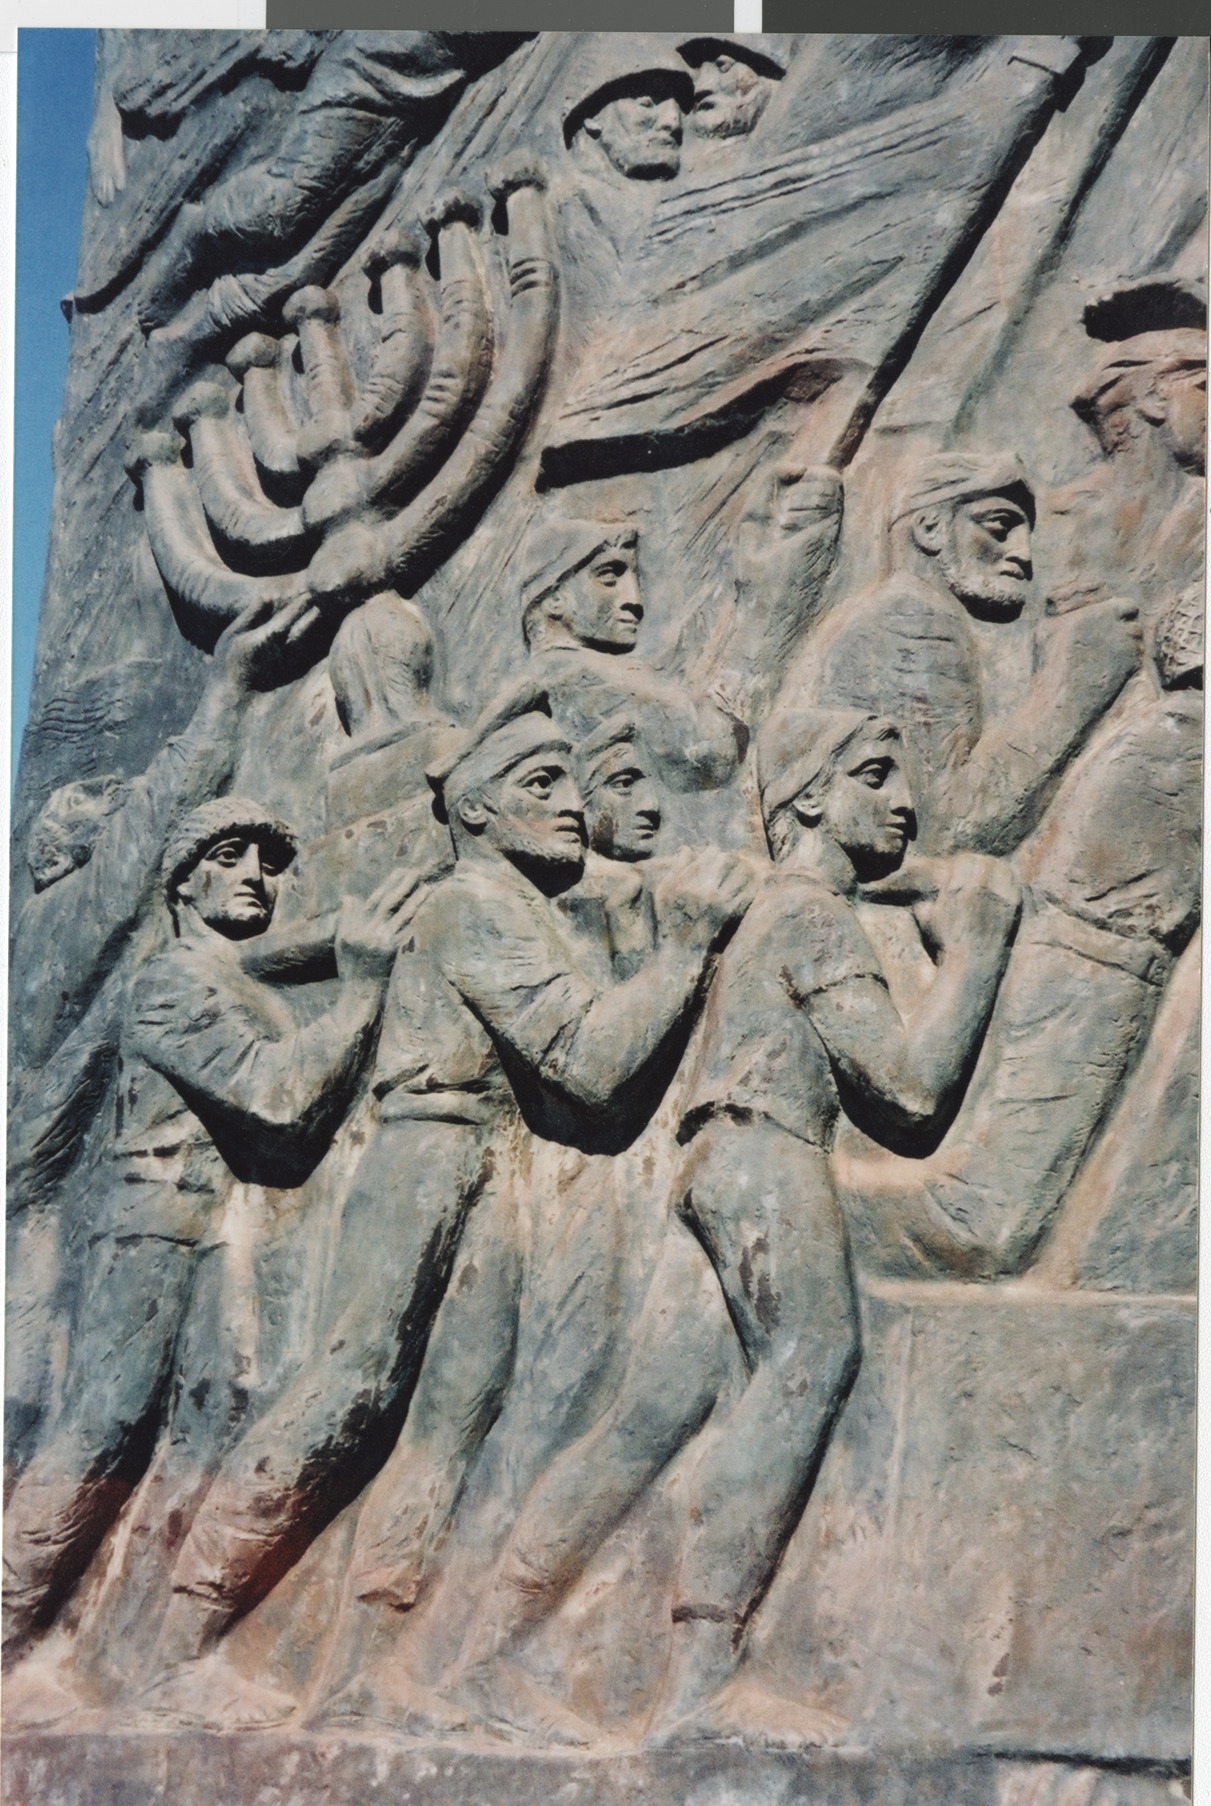 Photograph of a relief sculpture in Jerusalem